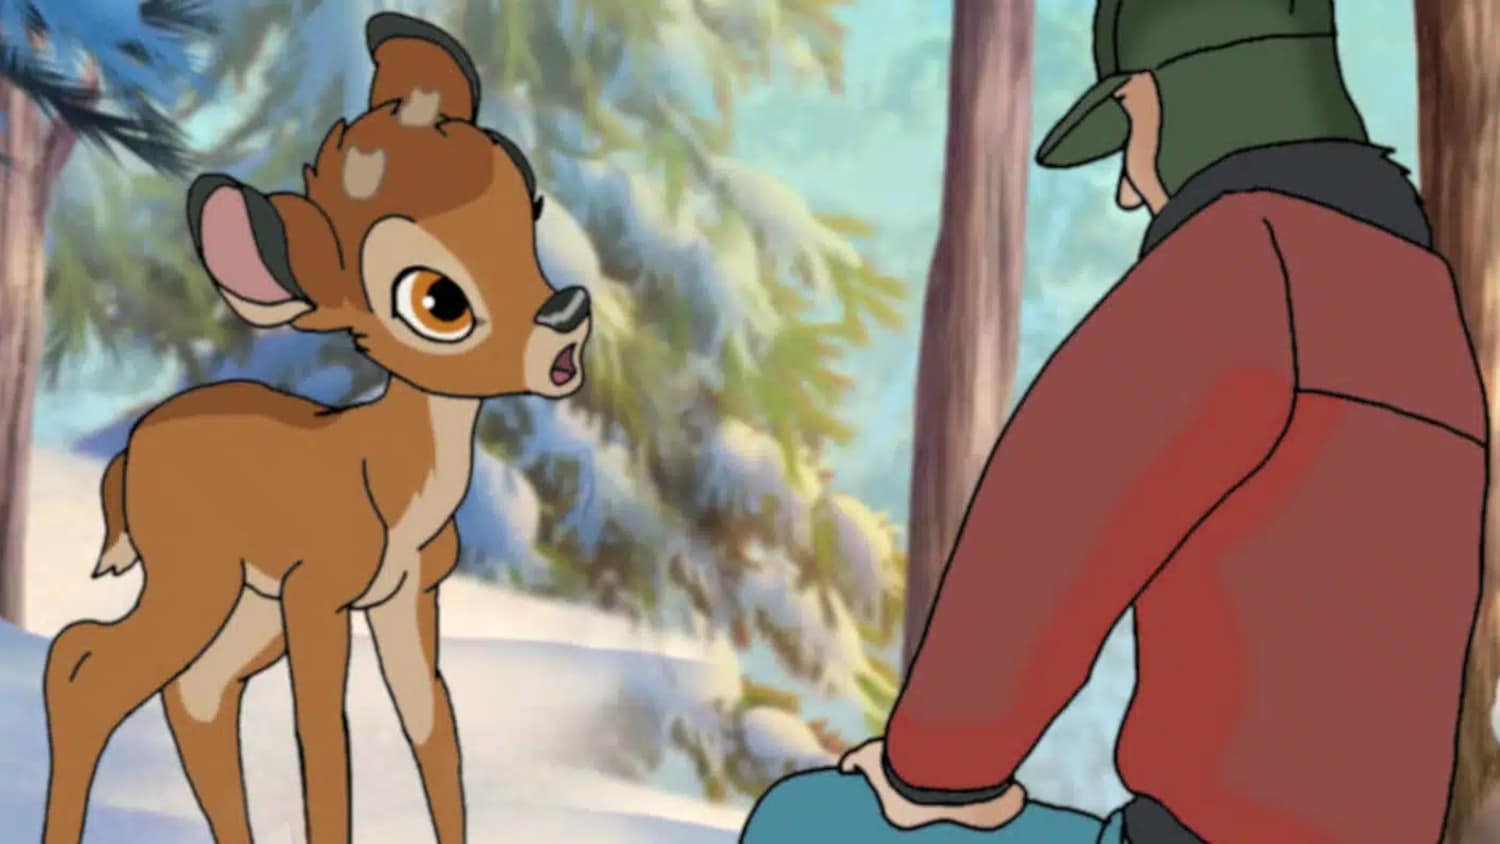 Disney’s Live-Action ‘Bambi’ Possibly Canceled